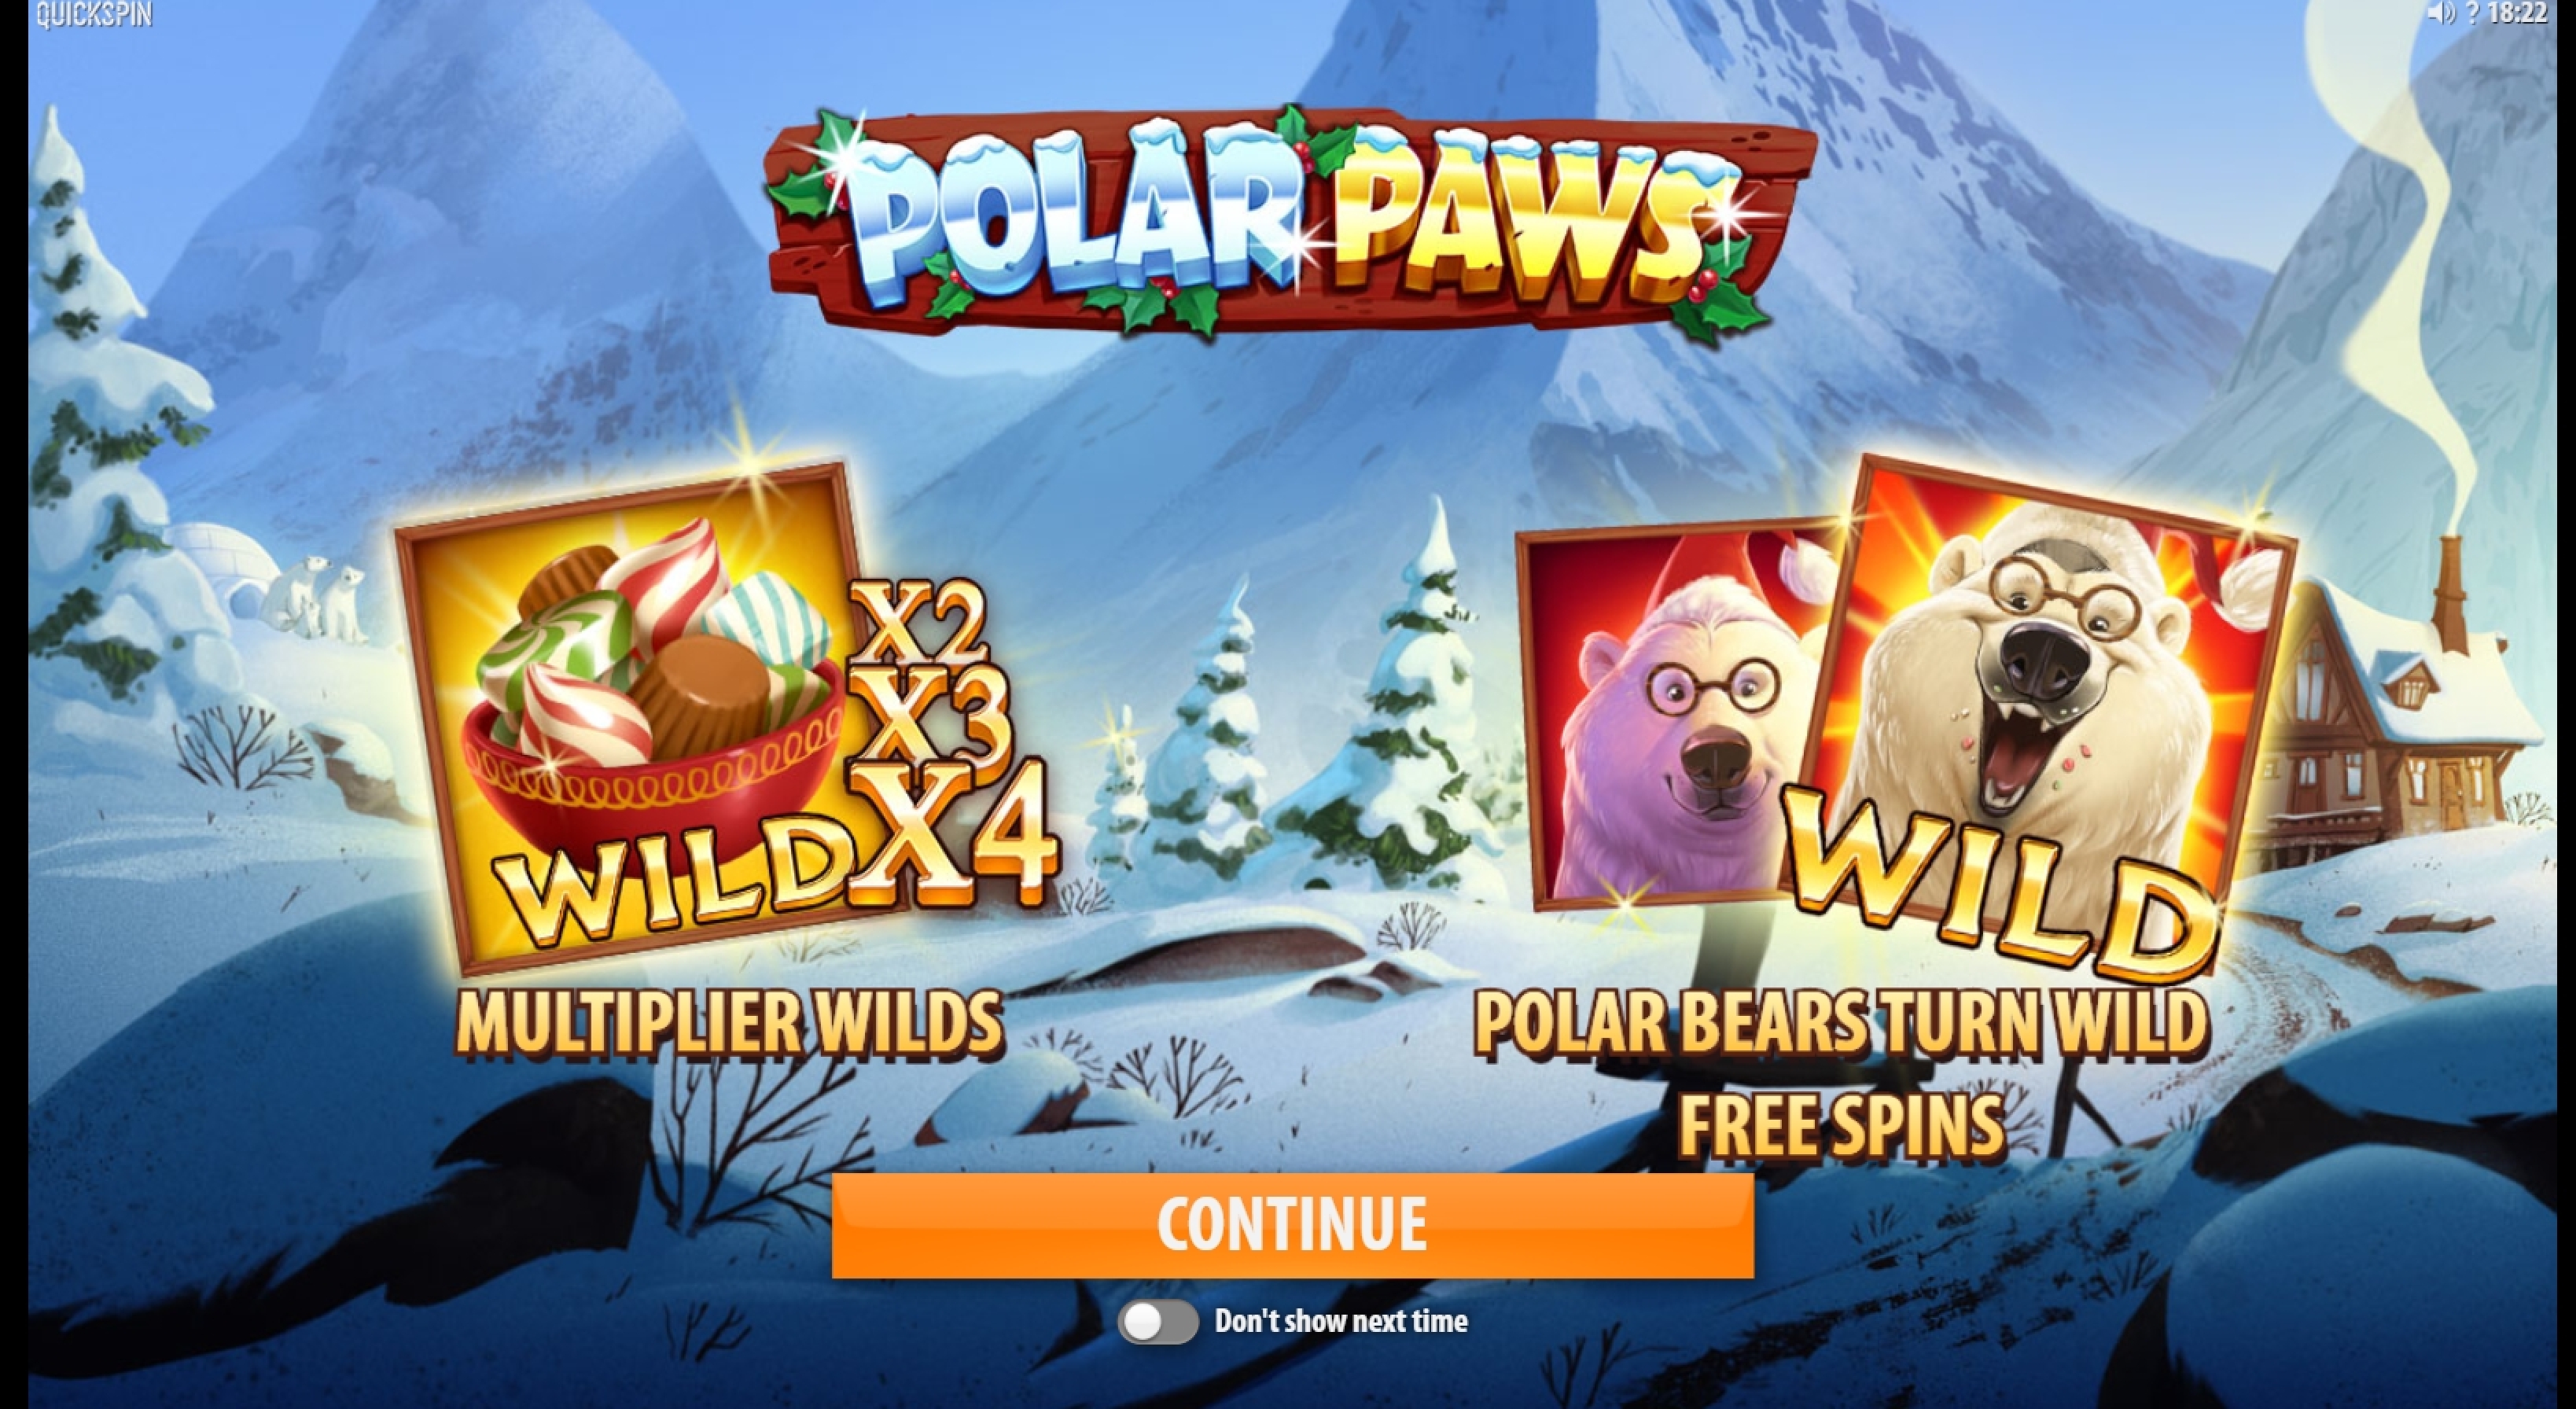 Play Polar Paws Free Casino Slot Game by Quickspin